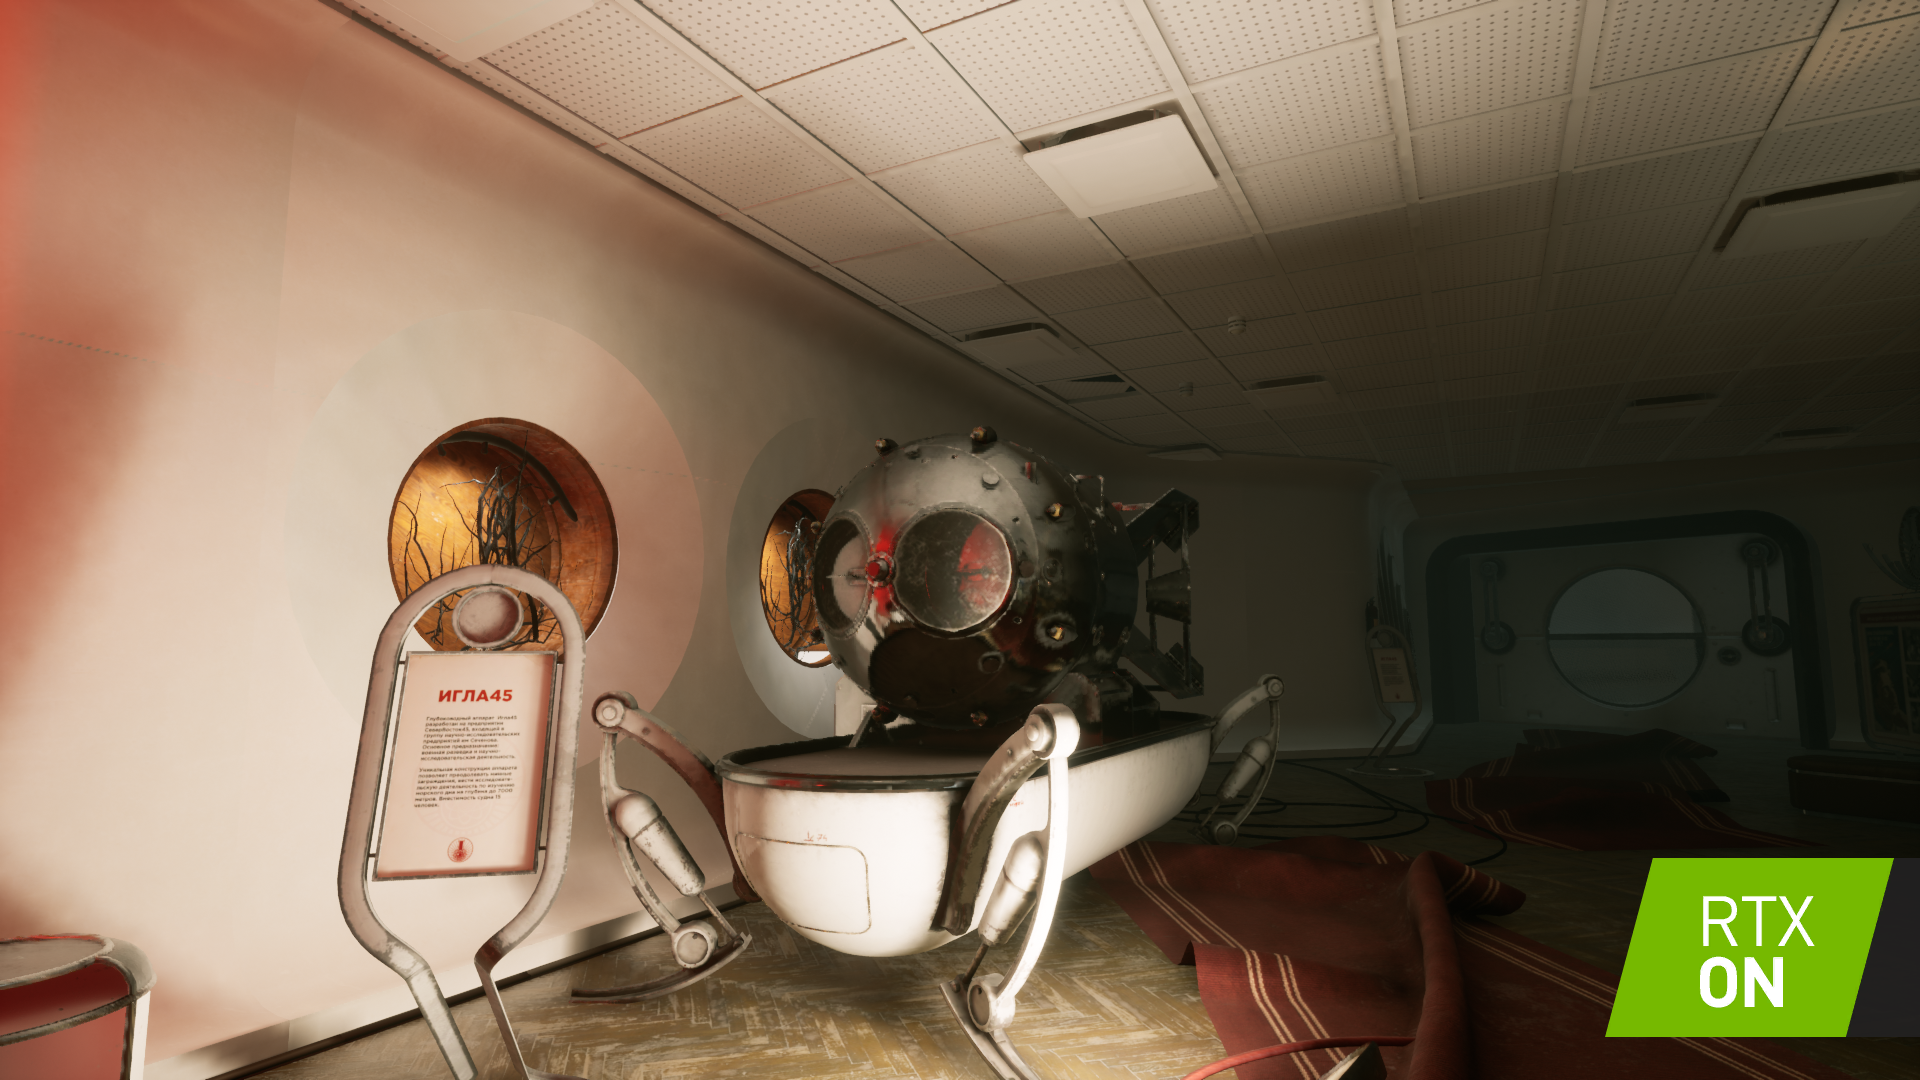 Atomic Heart Adds NVIDIA RTX Real-Time Ray Tracing – See The Stunning  Results In Our Exclusive Video, GeForce News